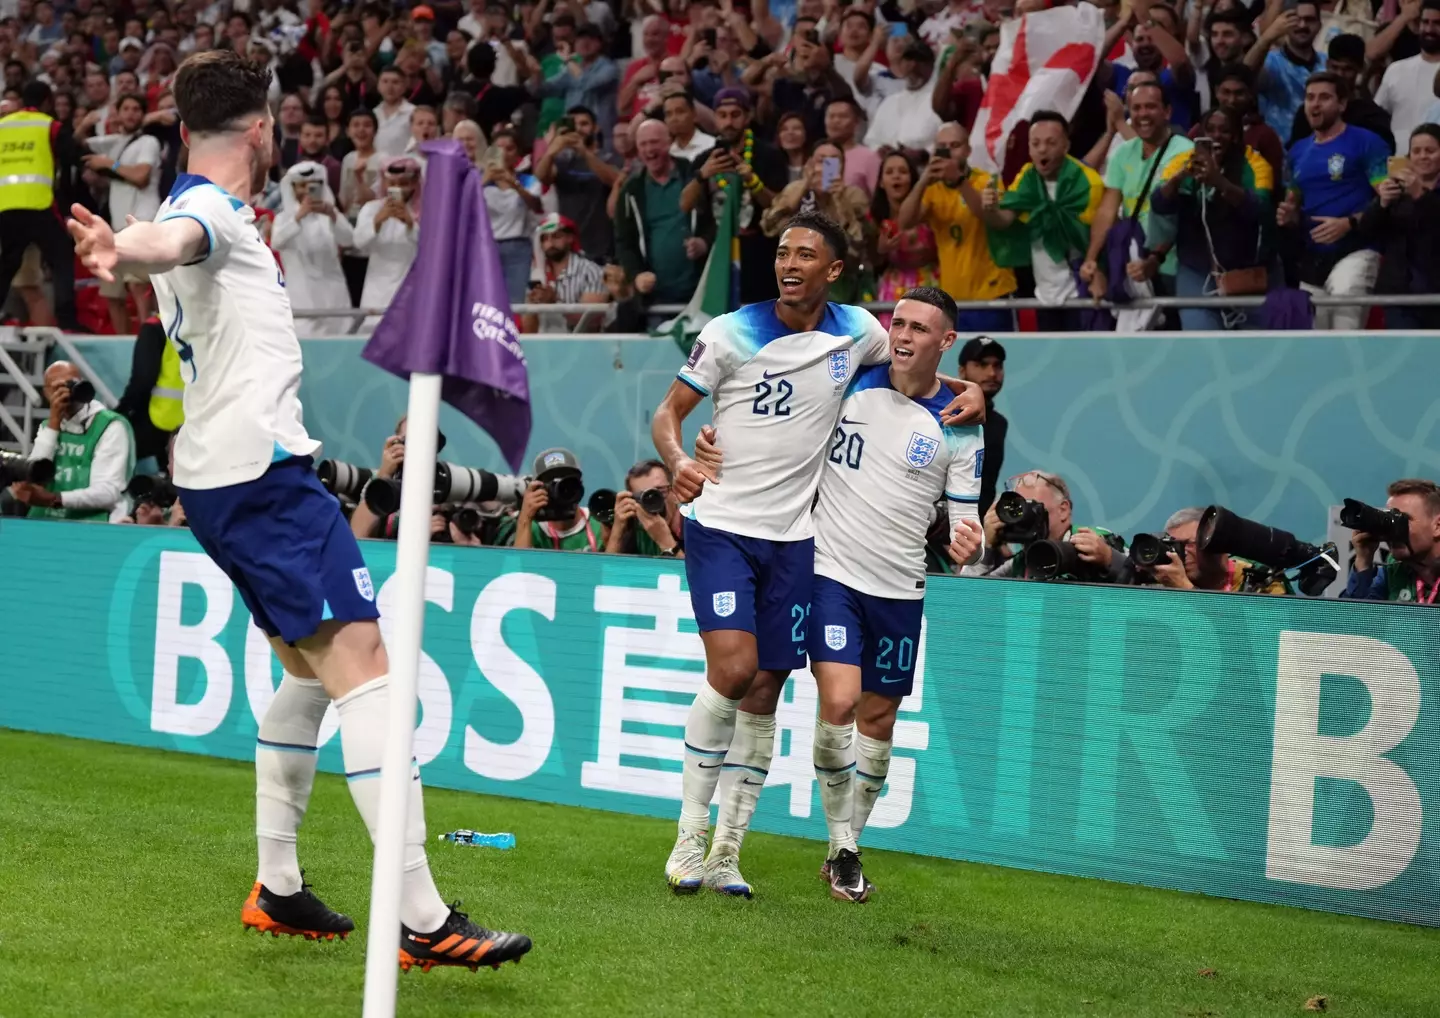 Bellingham celebrates with Foden after England's second goal against Wales.